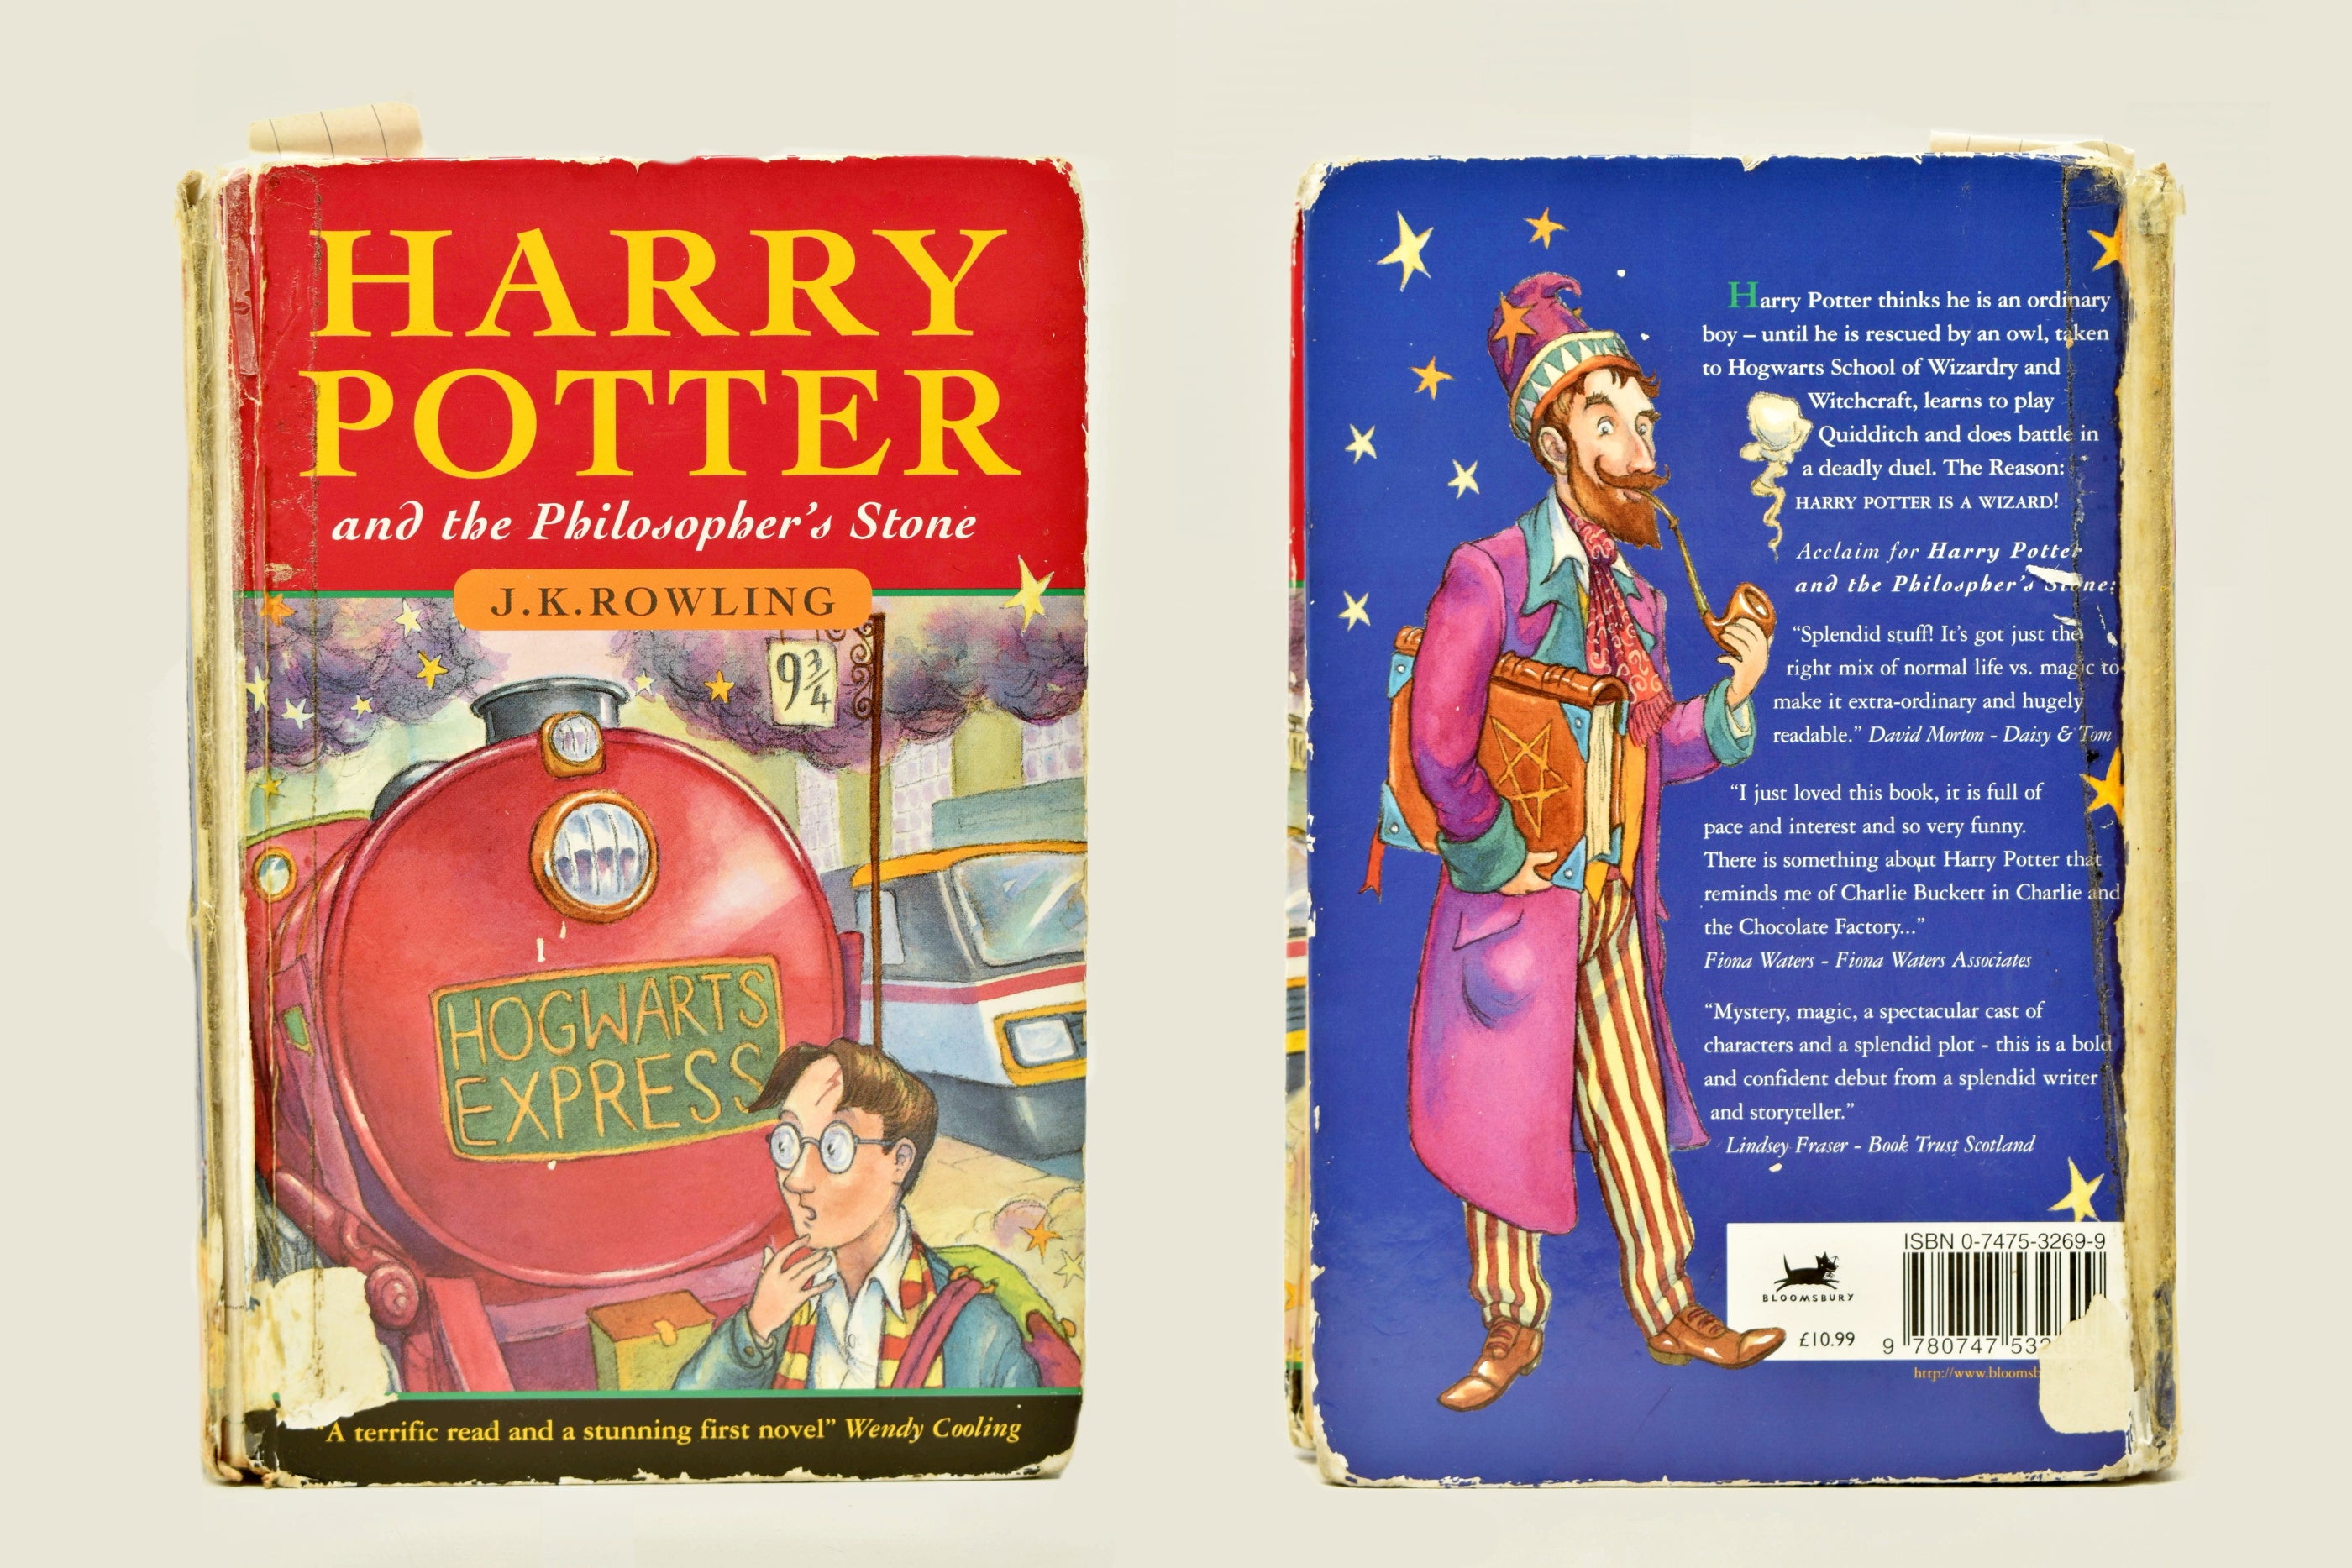 Harry Potter: Rare first edition book sold for more than £10,000